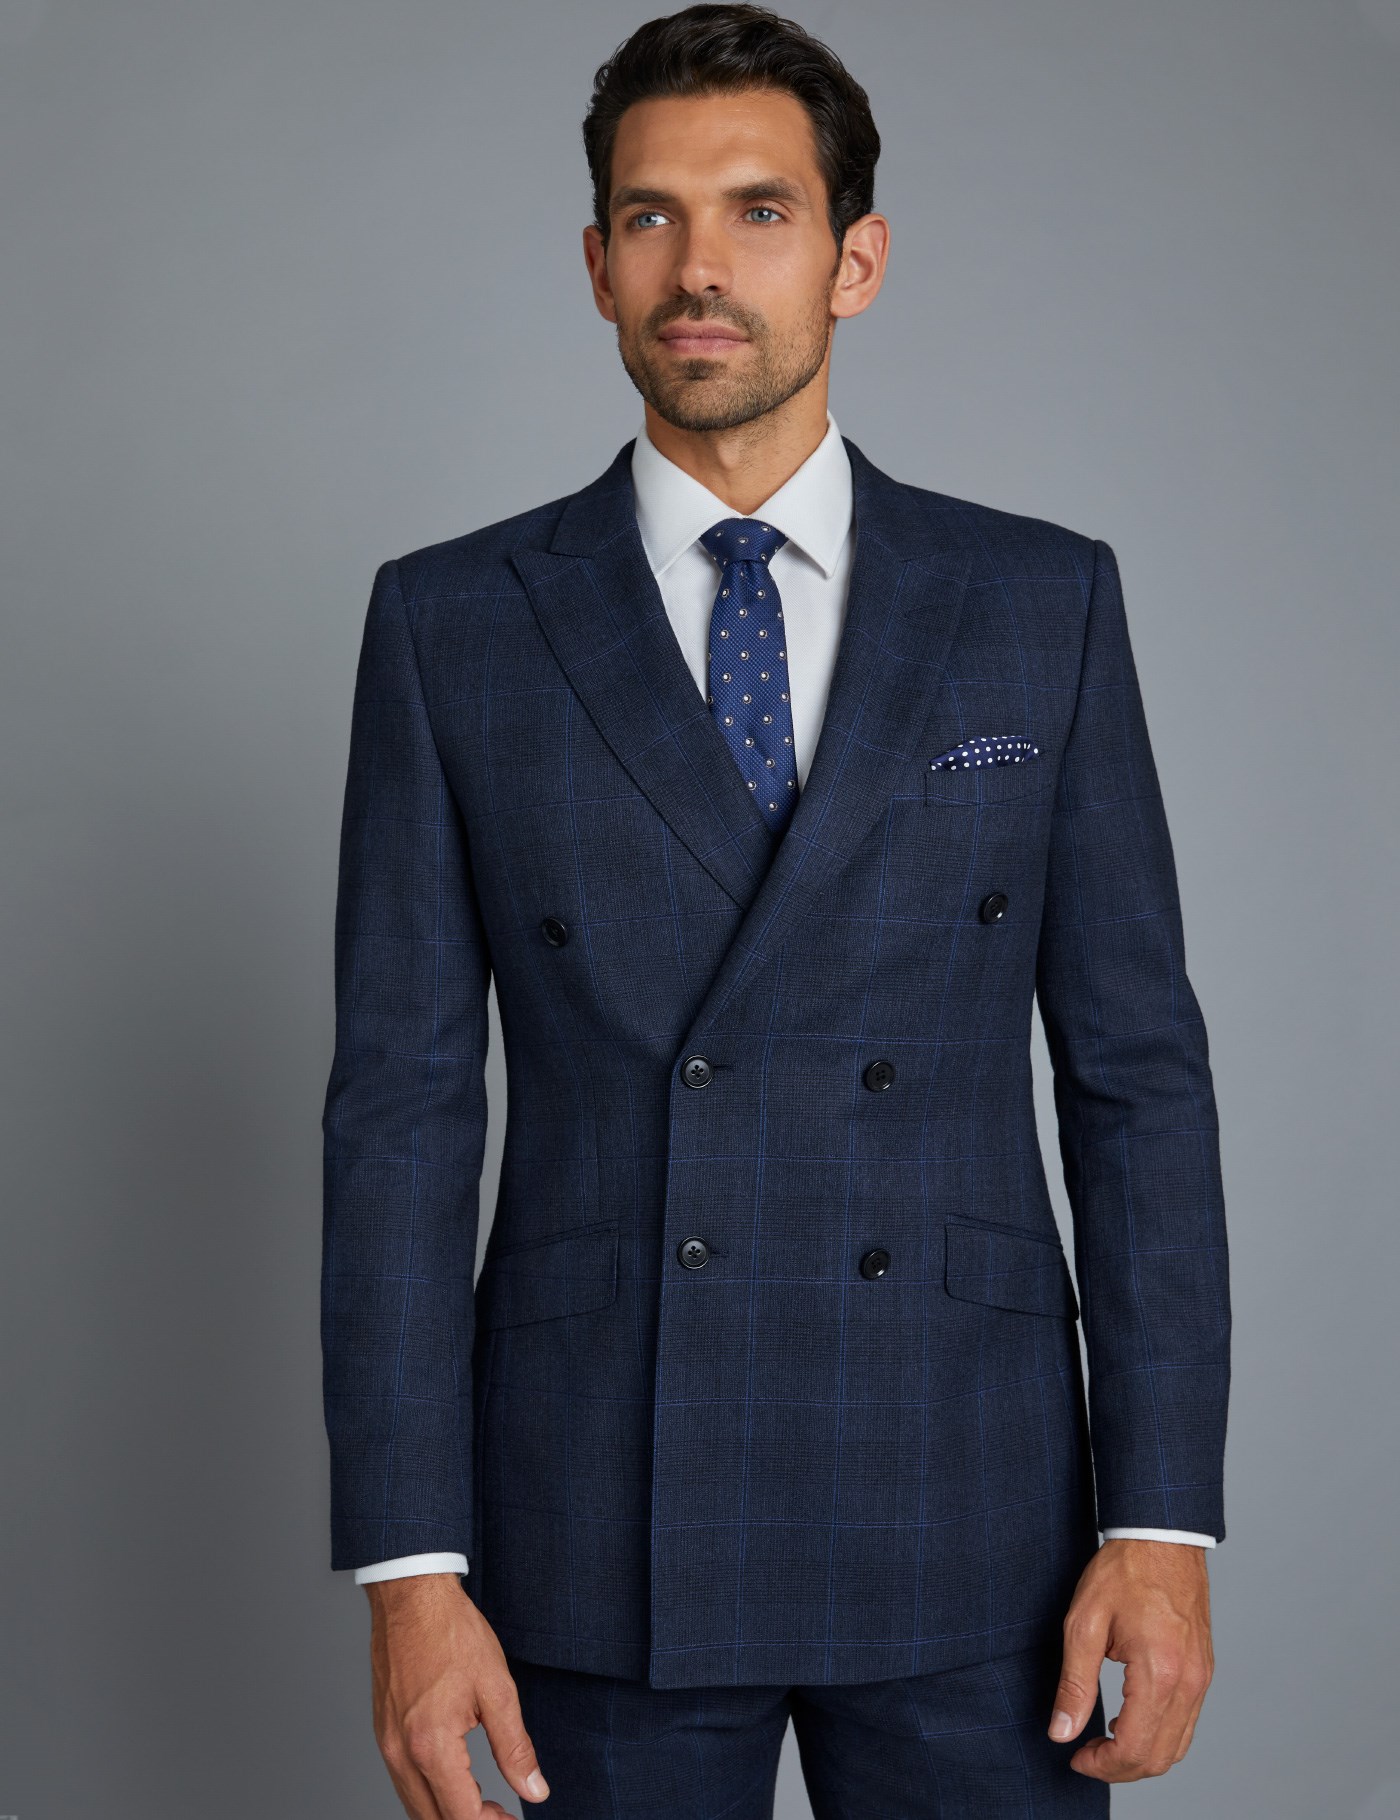 Men's Navy & Blue Prince of Wales Windowpane Check Slim Fit Suit Jacket ...